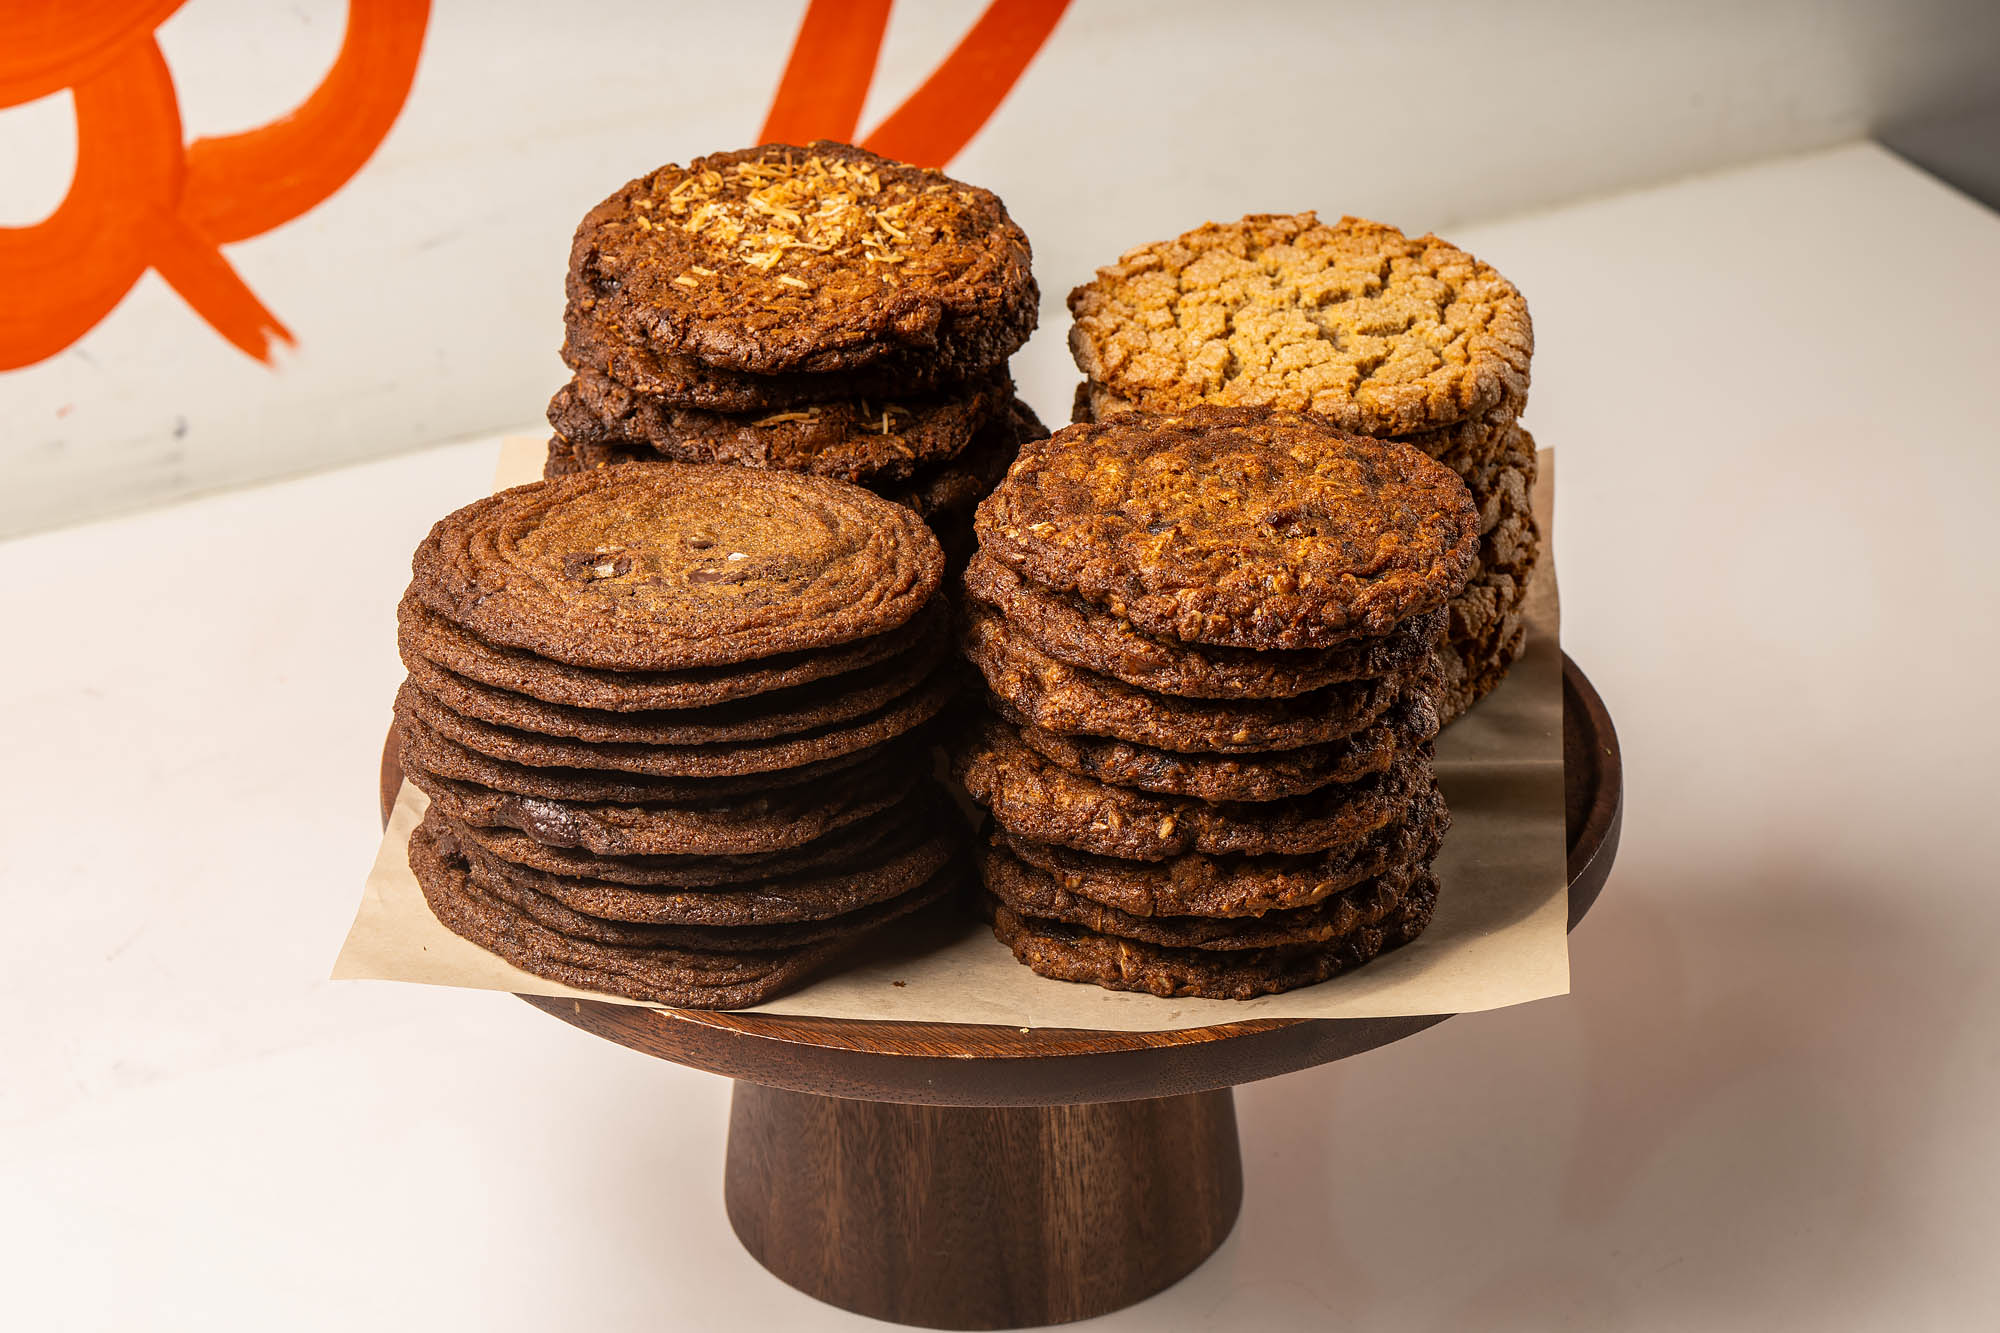 A round wooden elevated tray of stacks of different kinds of dark cookies at Friends &amp; Family bakery in Los Angeles.